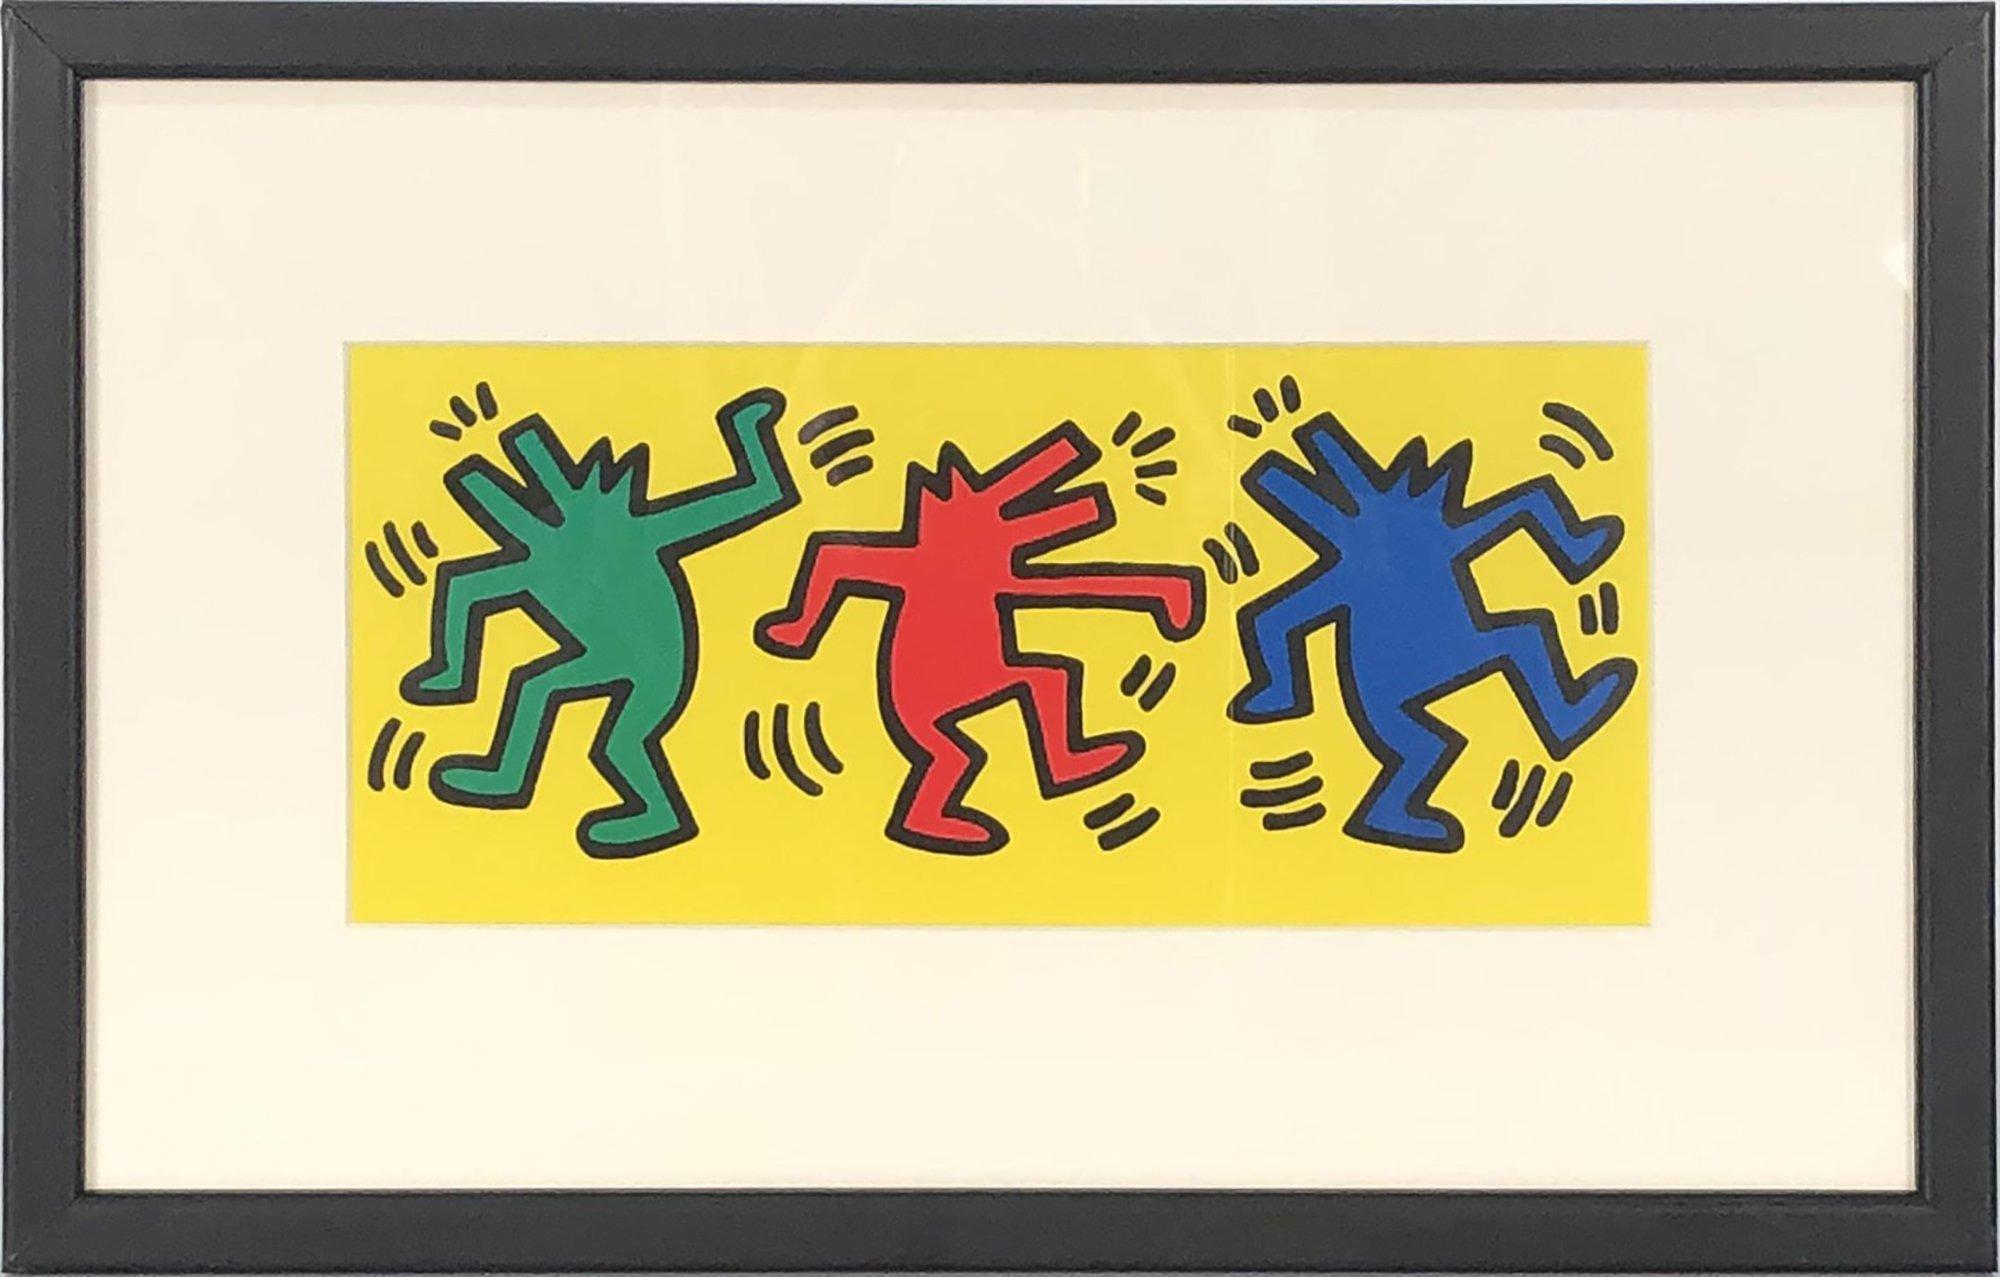 Paper Size: 9 x 14.25 inches ( 22.86 x 36.195 cm )
 Image Size: 4 x 9.5 inches ( 10.16 x 24.13 cm )
 Framed: Yes
 Condition: A-: Near Mint, very light signs of handling
 
 Additional Details: Vintage Keith Haring Postcard Estate Authorized 1998 Fold